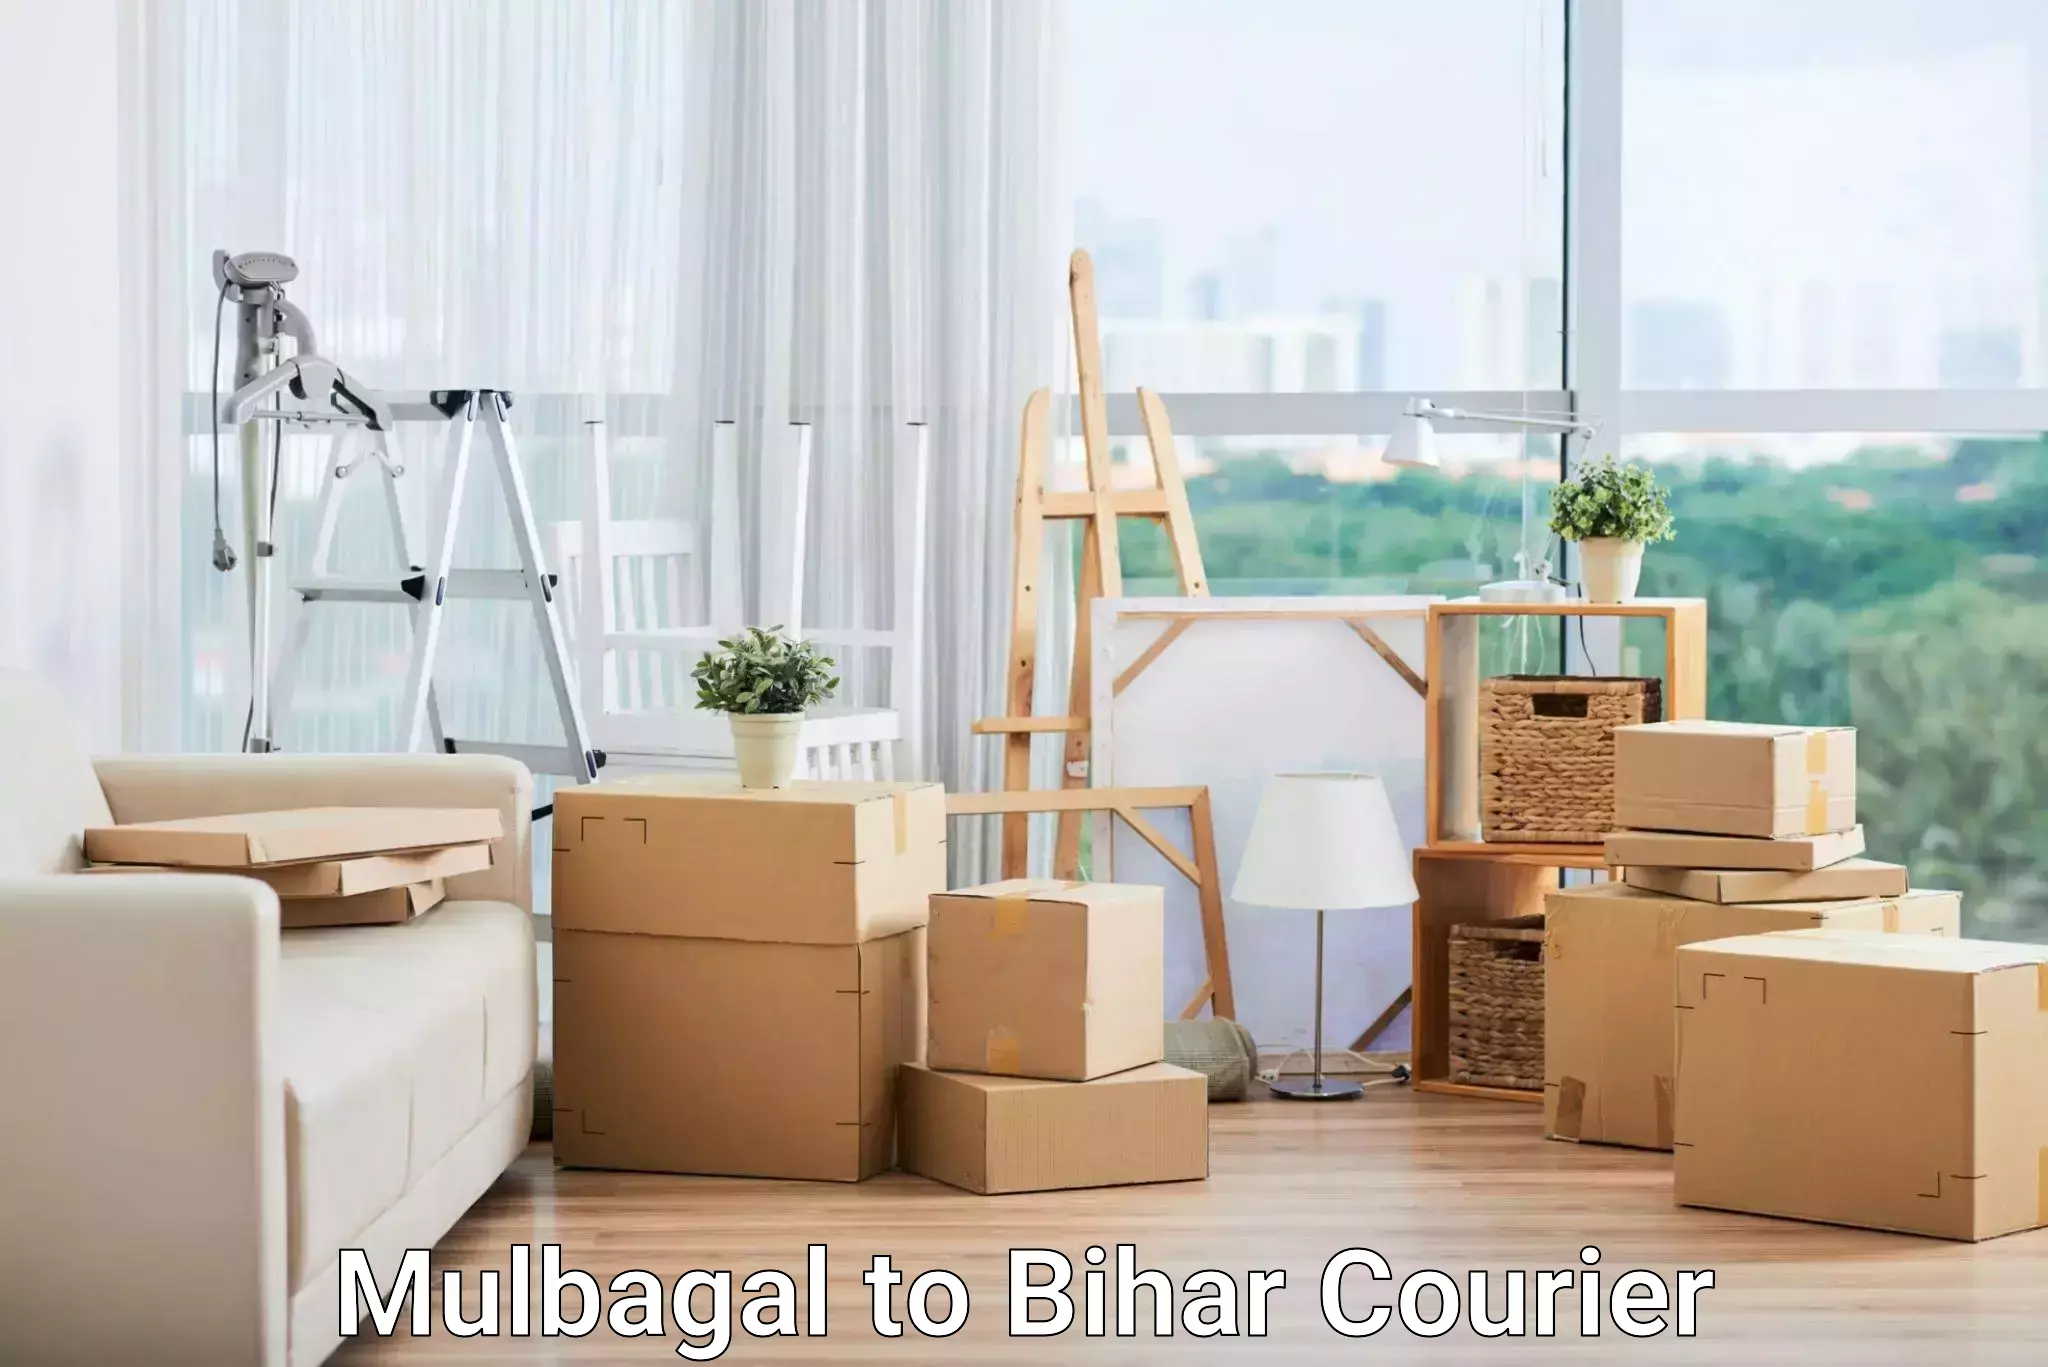 Full-service courier options Mulbagal to Kaluahi